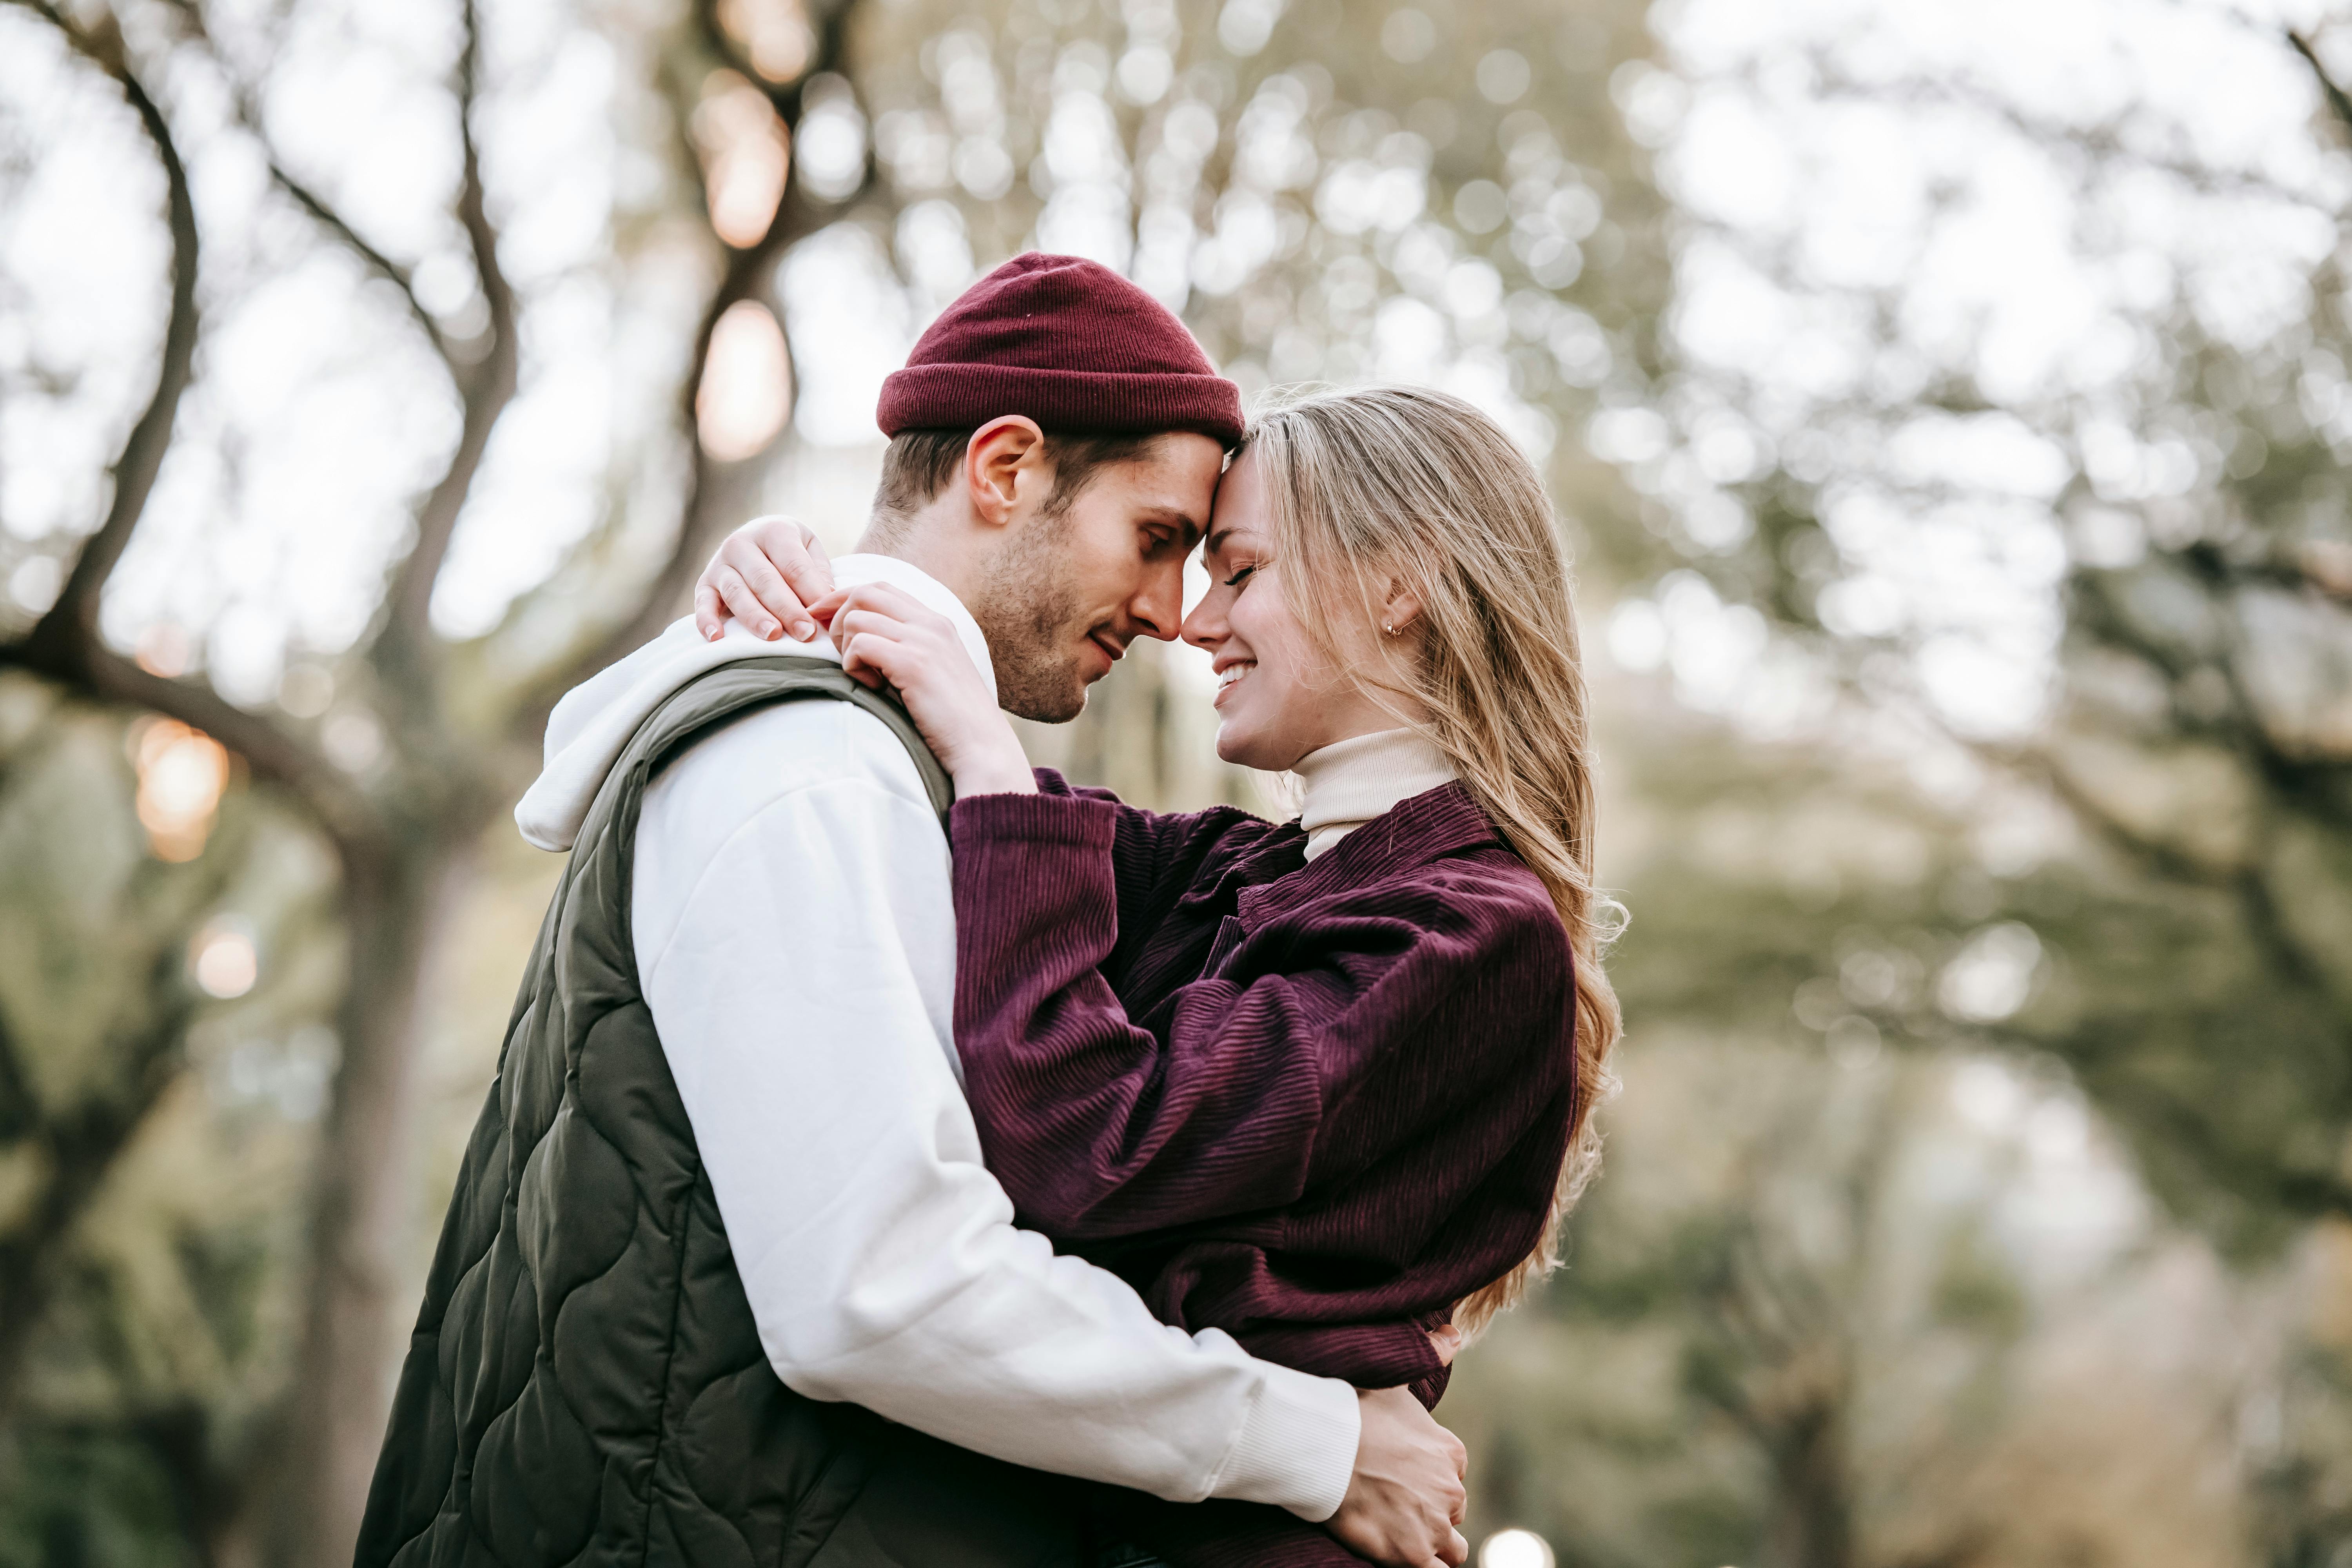 Happy Couple Poses Together Dusk Dramatic Stock Photo 34509568 |  Shutterstock